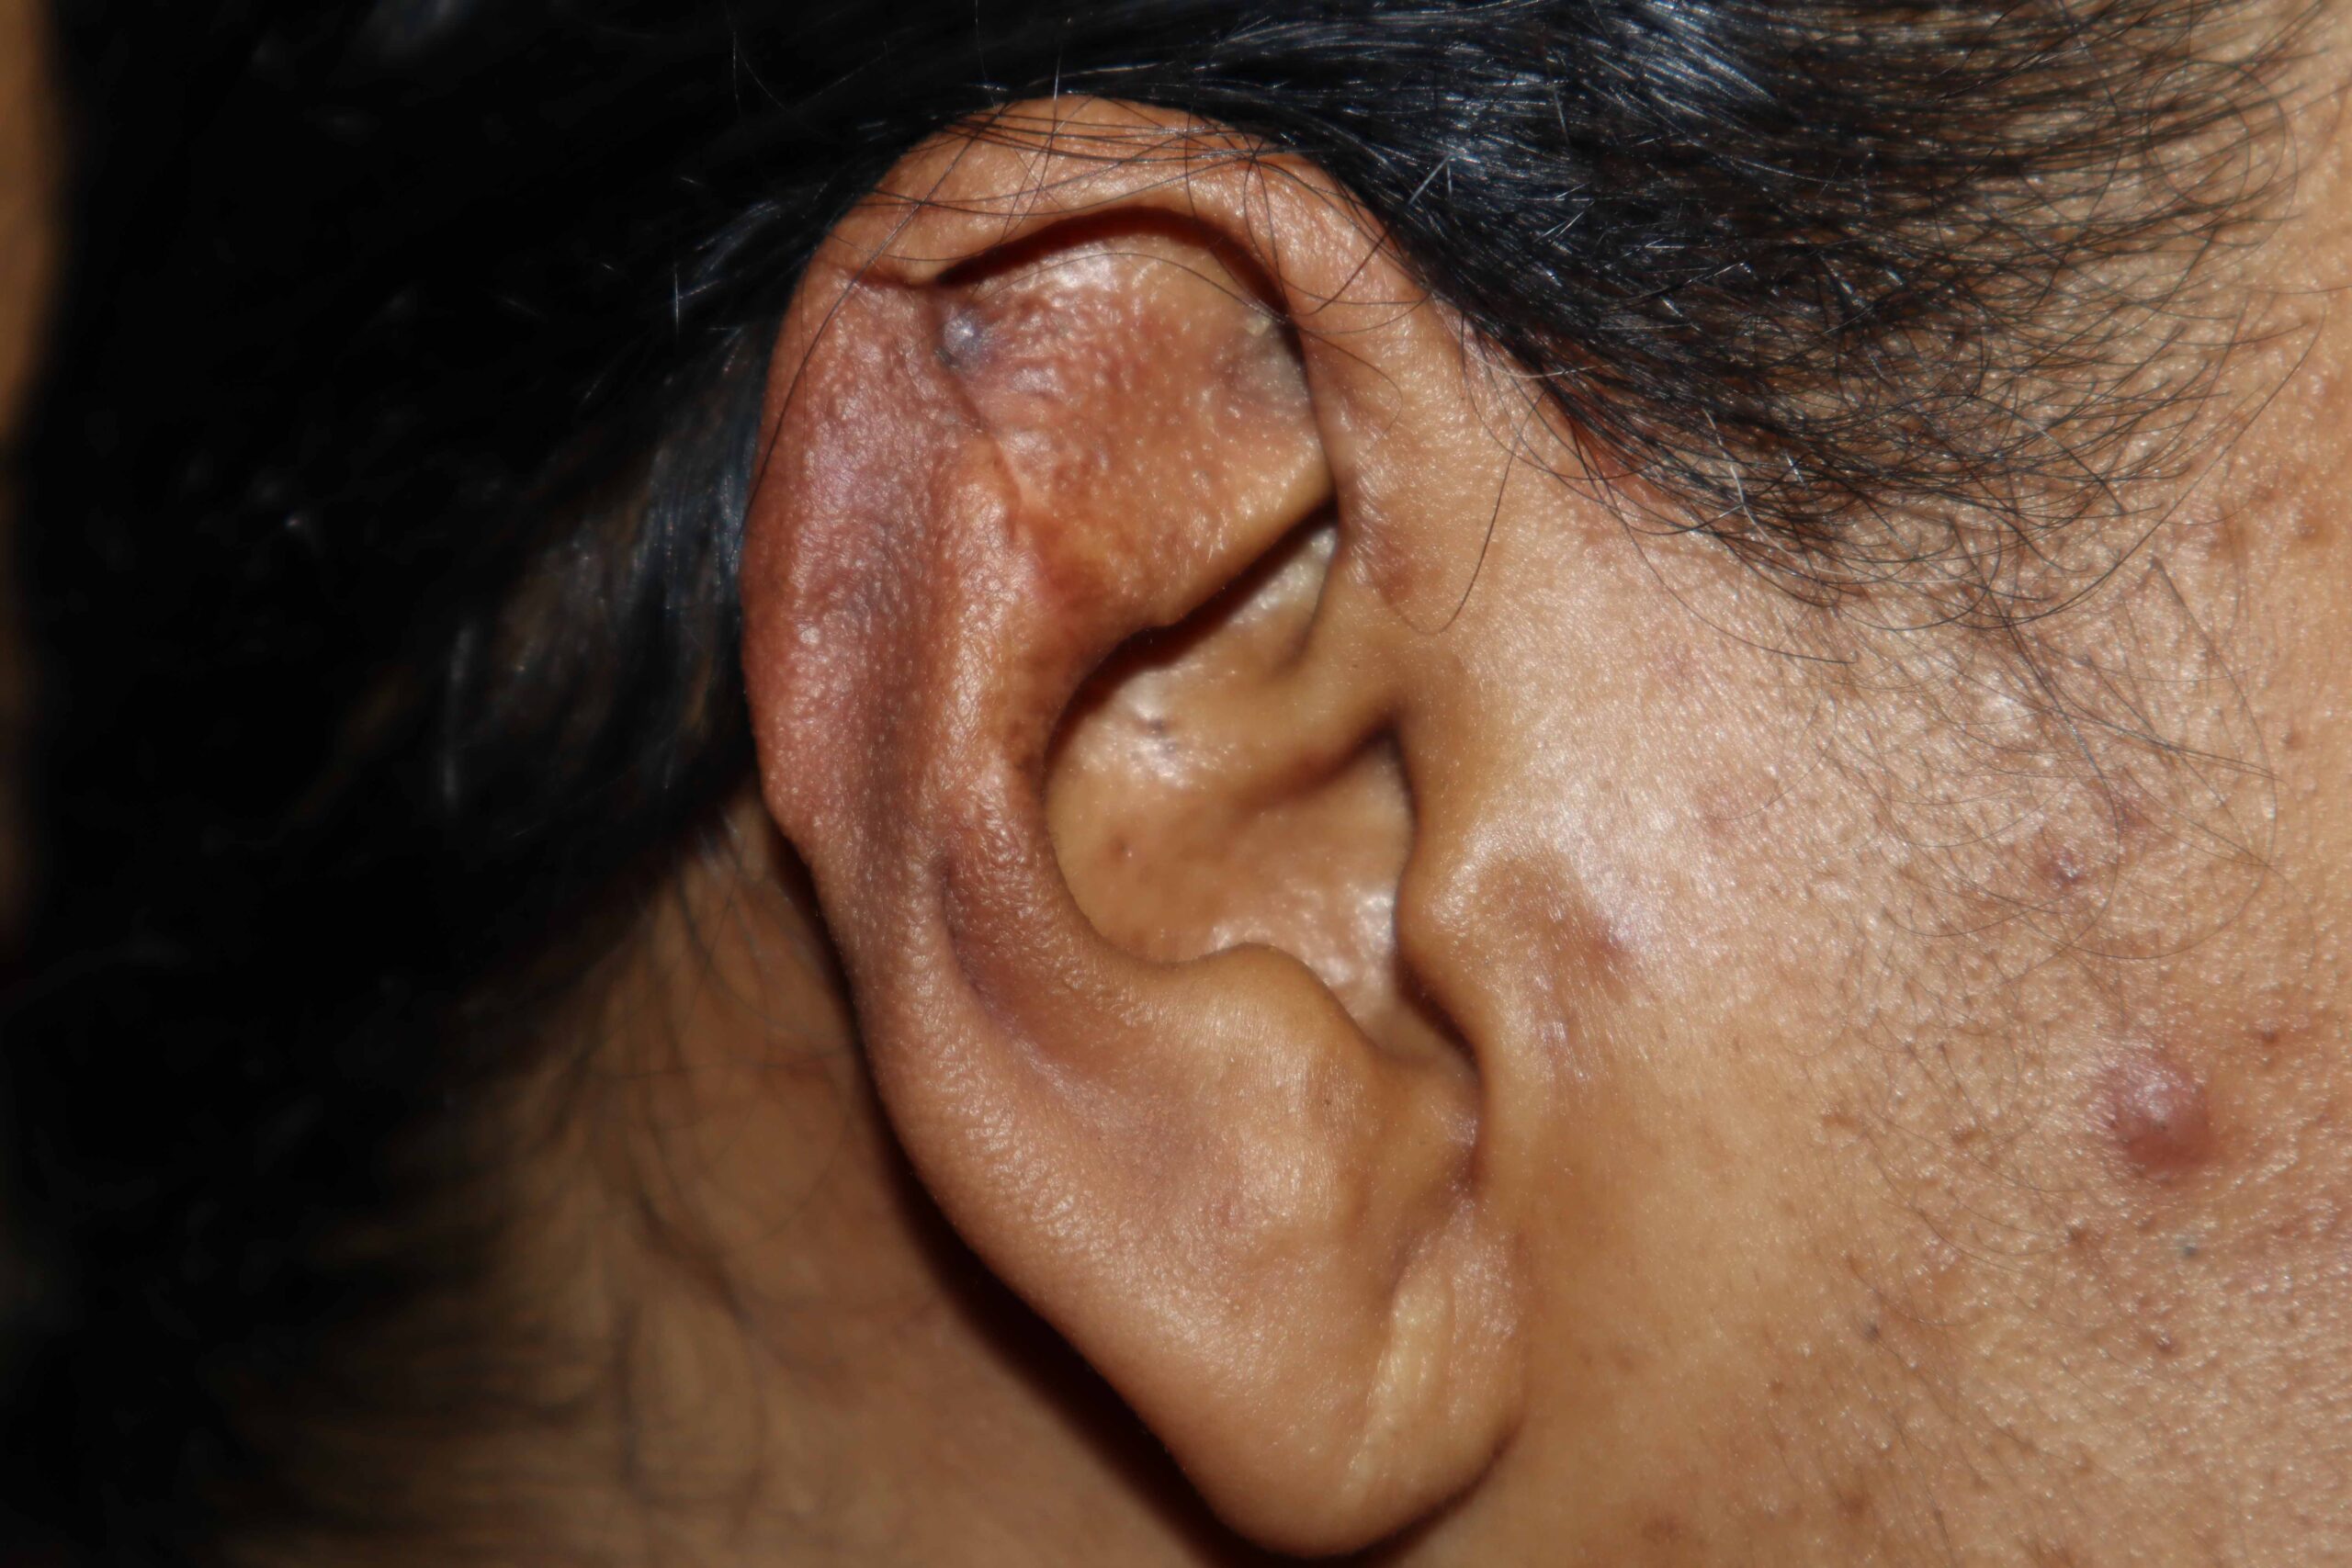 Giant relapsing earlobe keloid – Successful combined treatment by surgery  and pressure earring